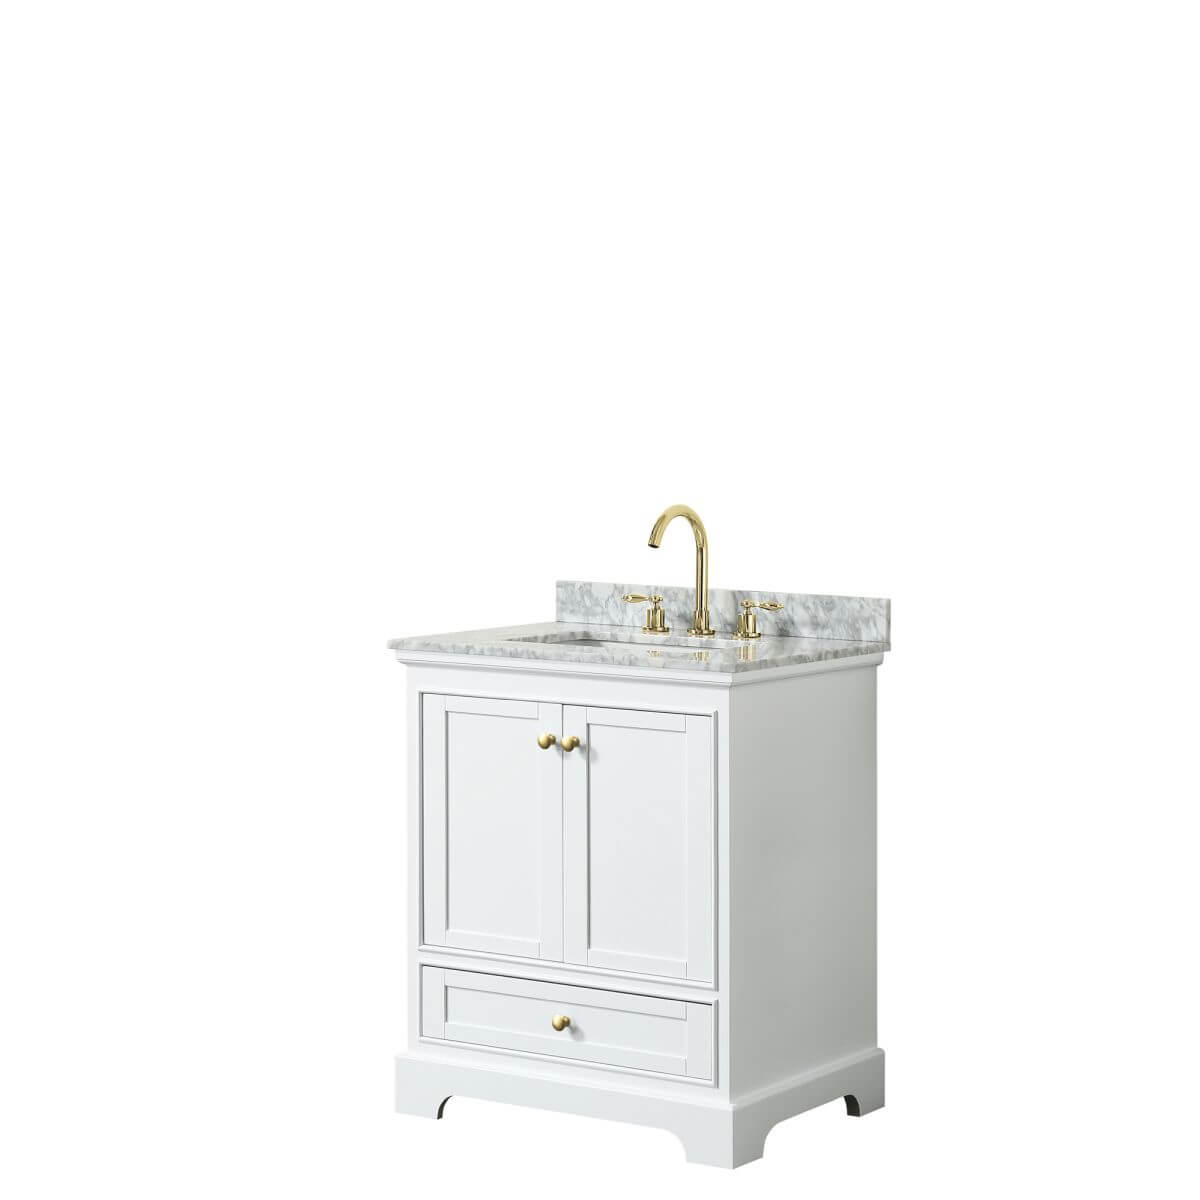 Wyndham Collection Deborah 30 inch Single Bathroom Vanity in White with White Carrara Marble Countertop, Undermount Square Sink, Brushed Gold Trim and No Mirror - WCS202030SWGCMUNSMXX